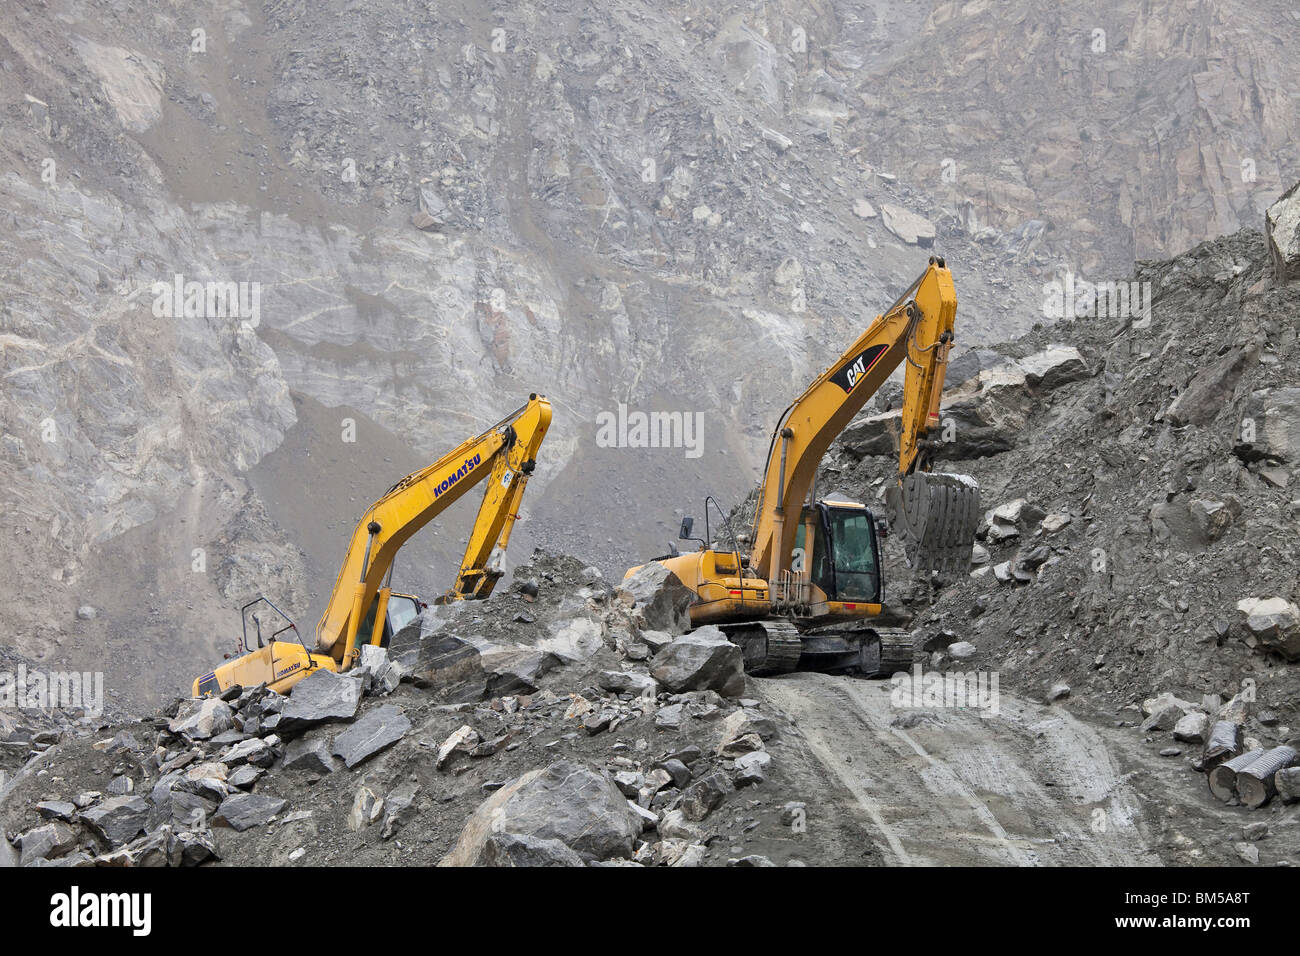 The spillway being dug at the landslide area at Attabad which blocks the Karakoram Highway, Hunza, Pakistan Stock Photo